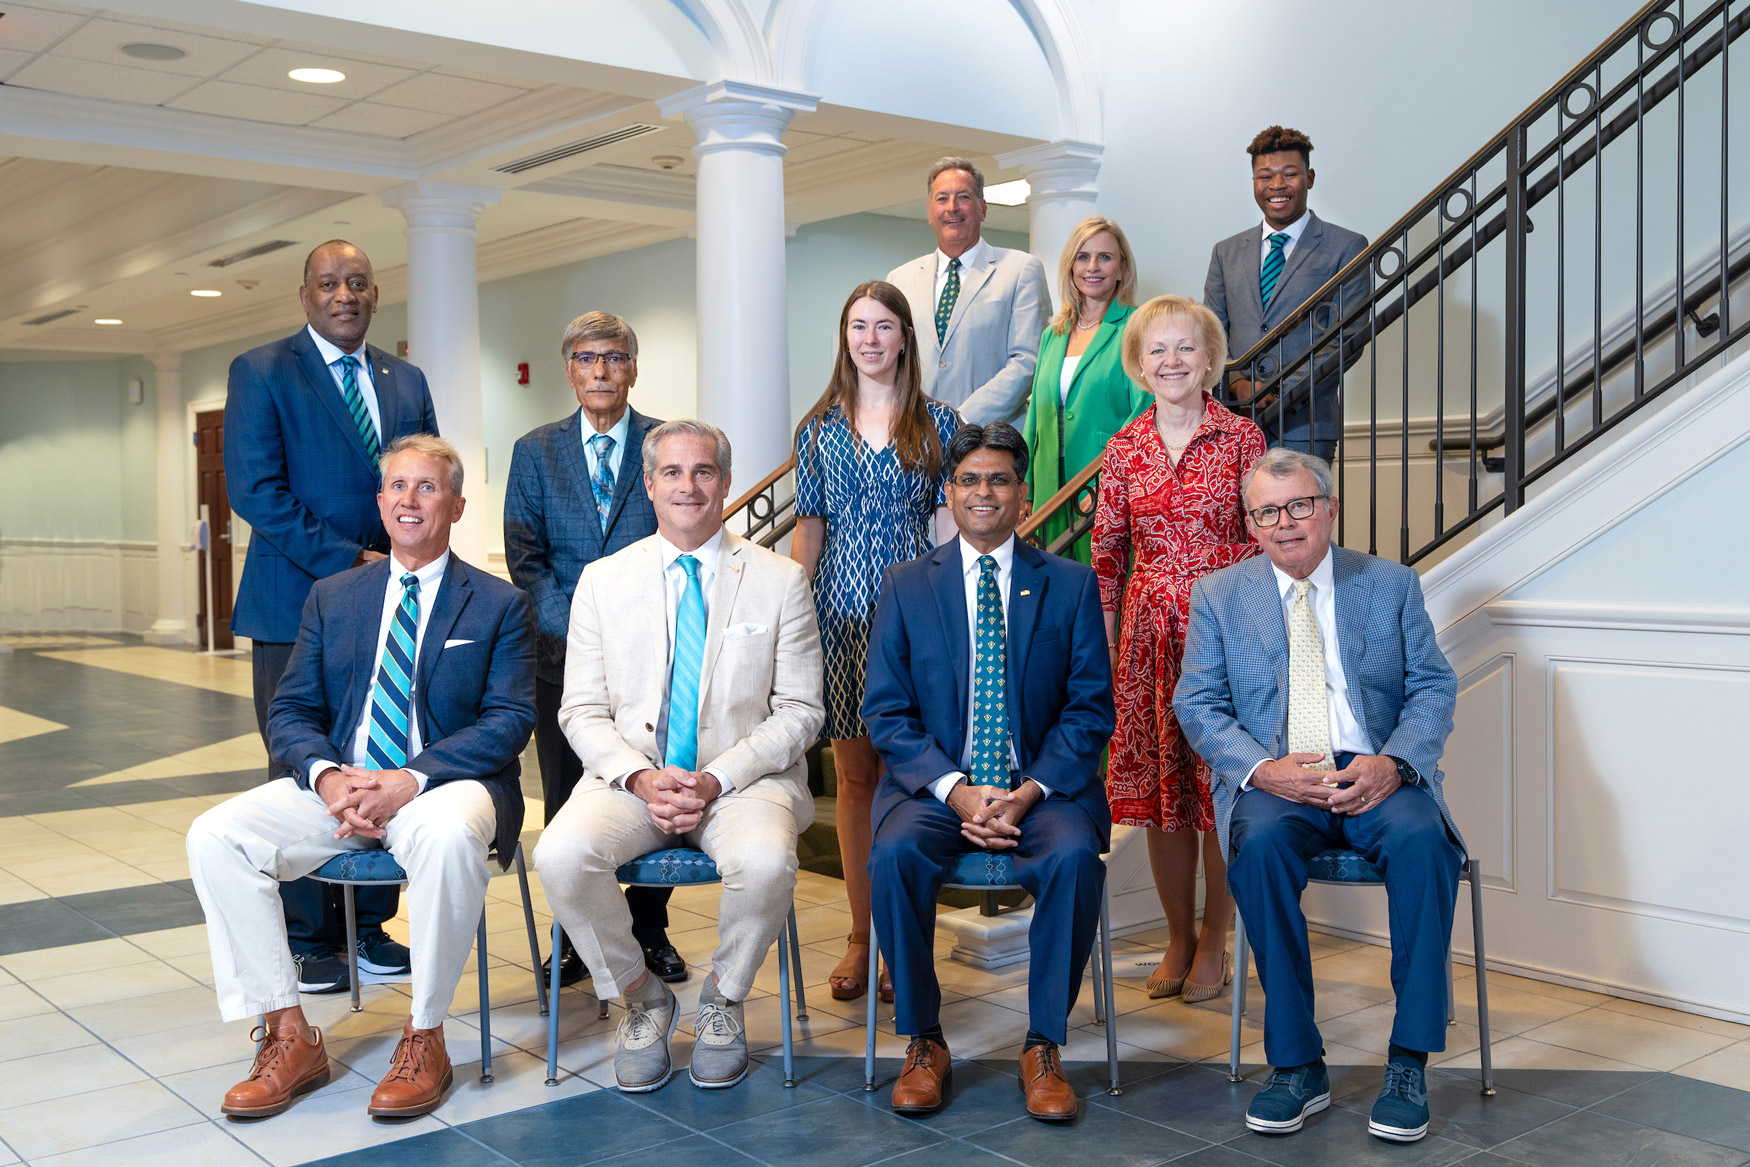 UNCW Board of Trustees: (Front Row L -R); Earl F. "Hugh" Caison, Carlton Fisher, Chancellor Aswani Volety, Robert S. Rippy,(2nd Row L-R); Malcomb D. Coley Sr., Yousry Sayed, Frances "Perry" Chappell, Aldona Z. Wos, (3rd Row L-R); Kevin H. Sills, Traci L. Butler, Cody Brandon.